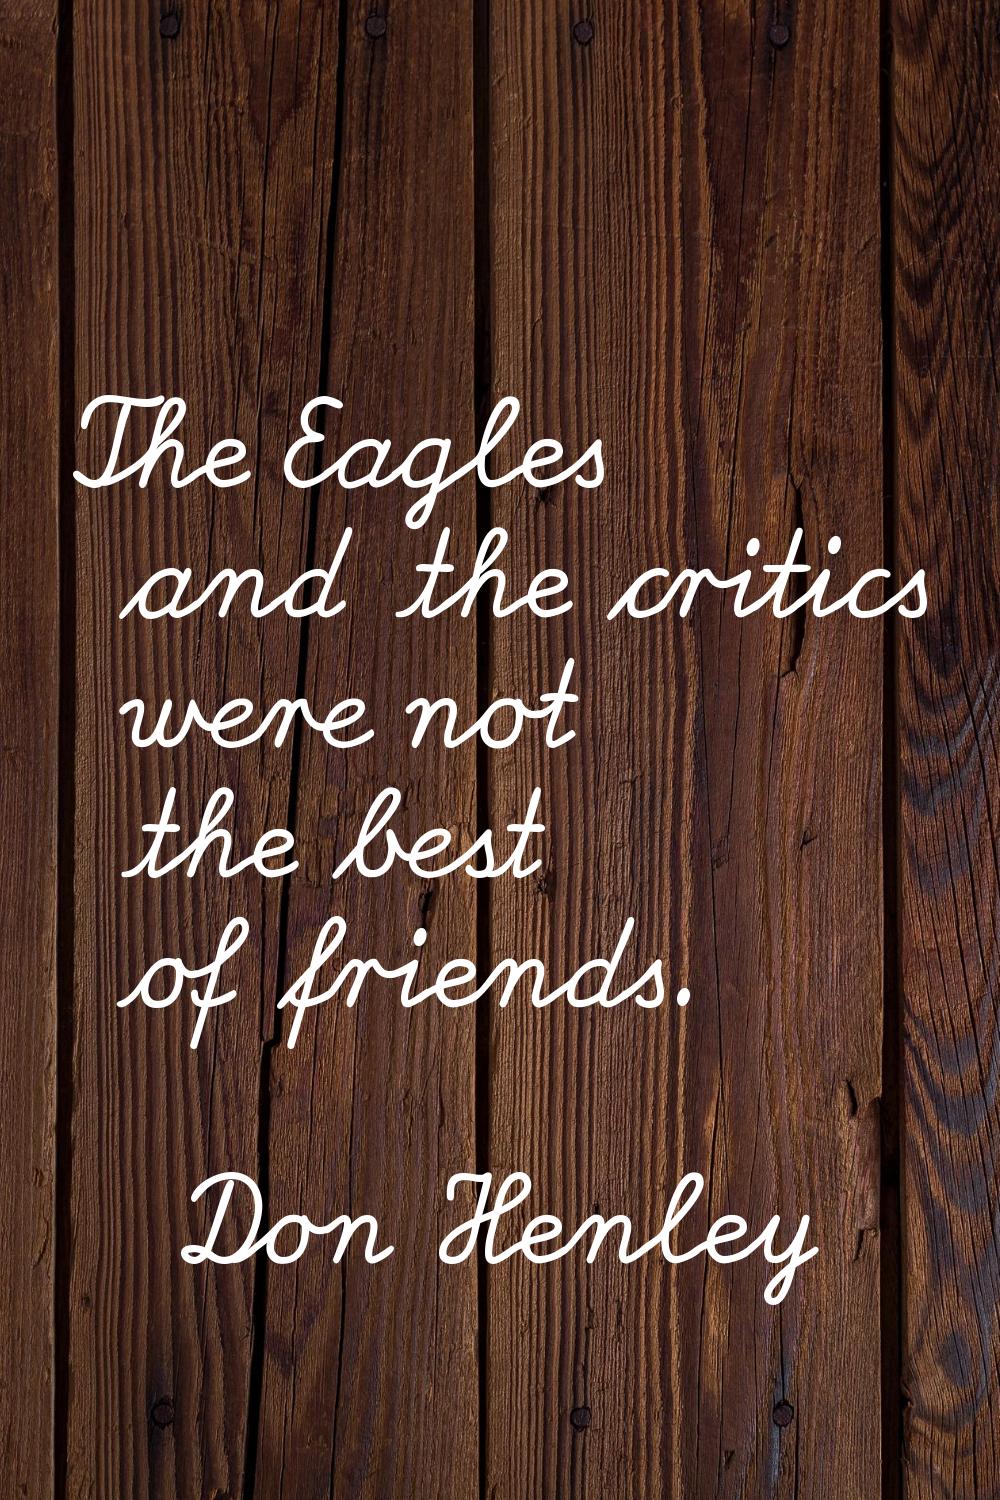 The Eagles and the critics were not the best of friends.